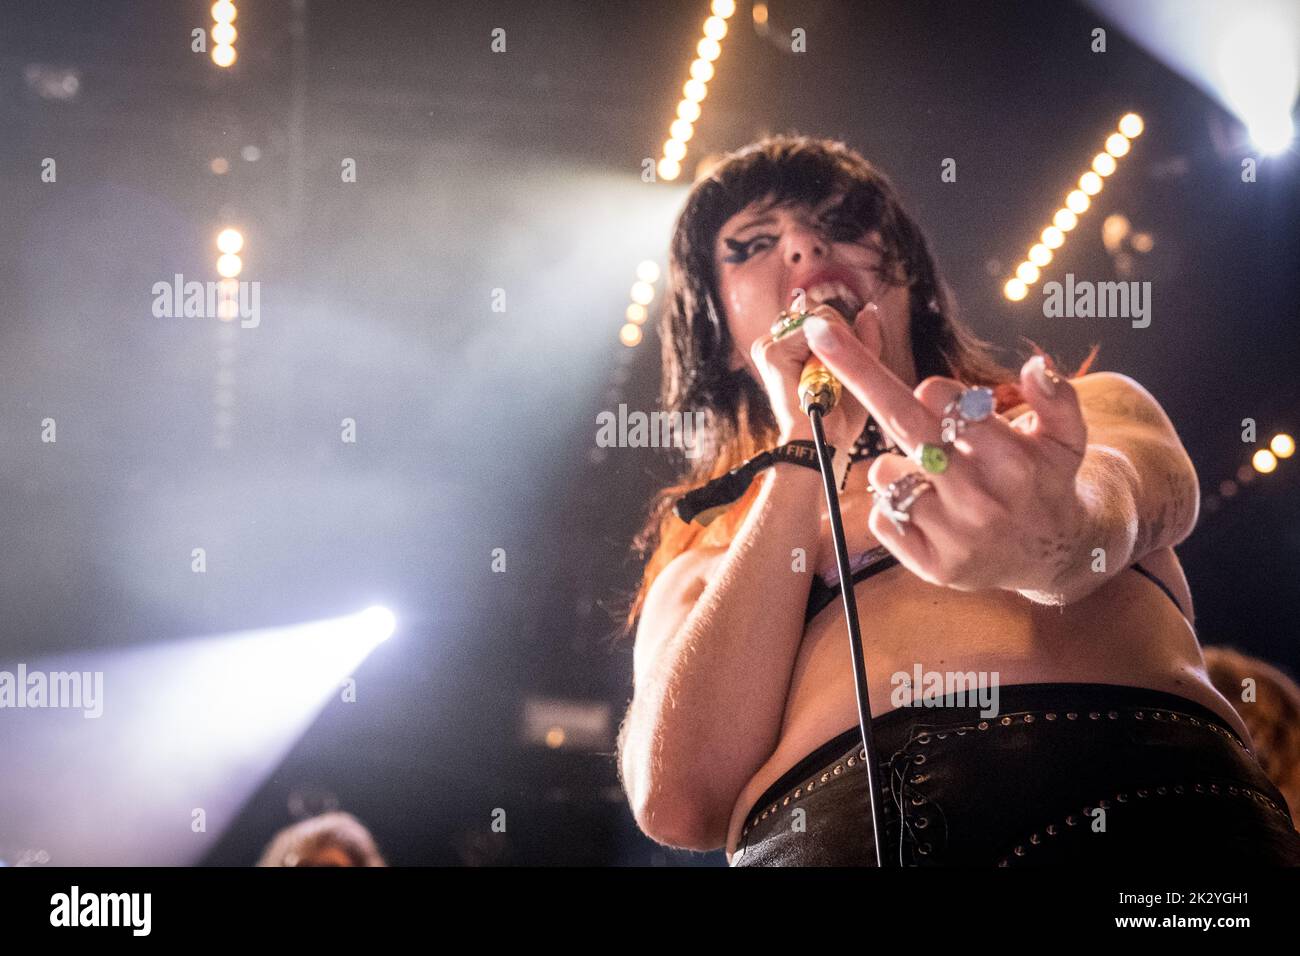 Roskilde, Denmark. 03rd, July 2022. The American punk rock band Surfbort performs a live concert at the Danish music festival Roskilde Festival 2022 in Roskilde. Here singer Dani Miller is seen live on stage. (Photo credit: Gonzales Photo - Thomas Rasmussen). Stock Photo